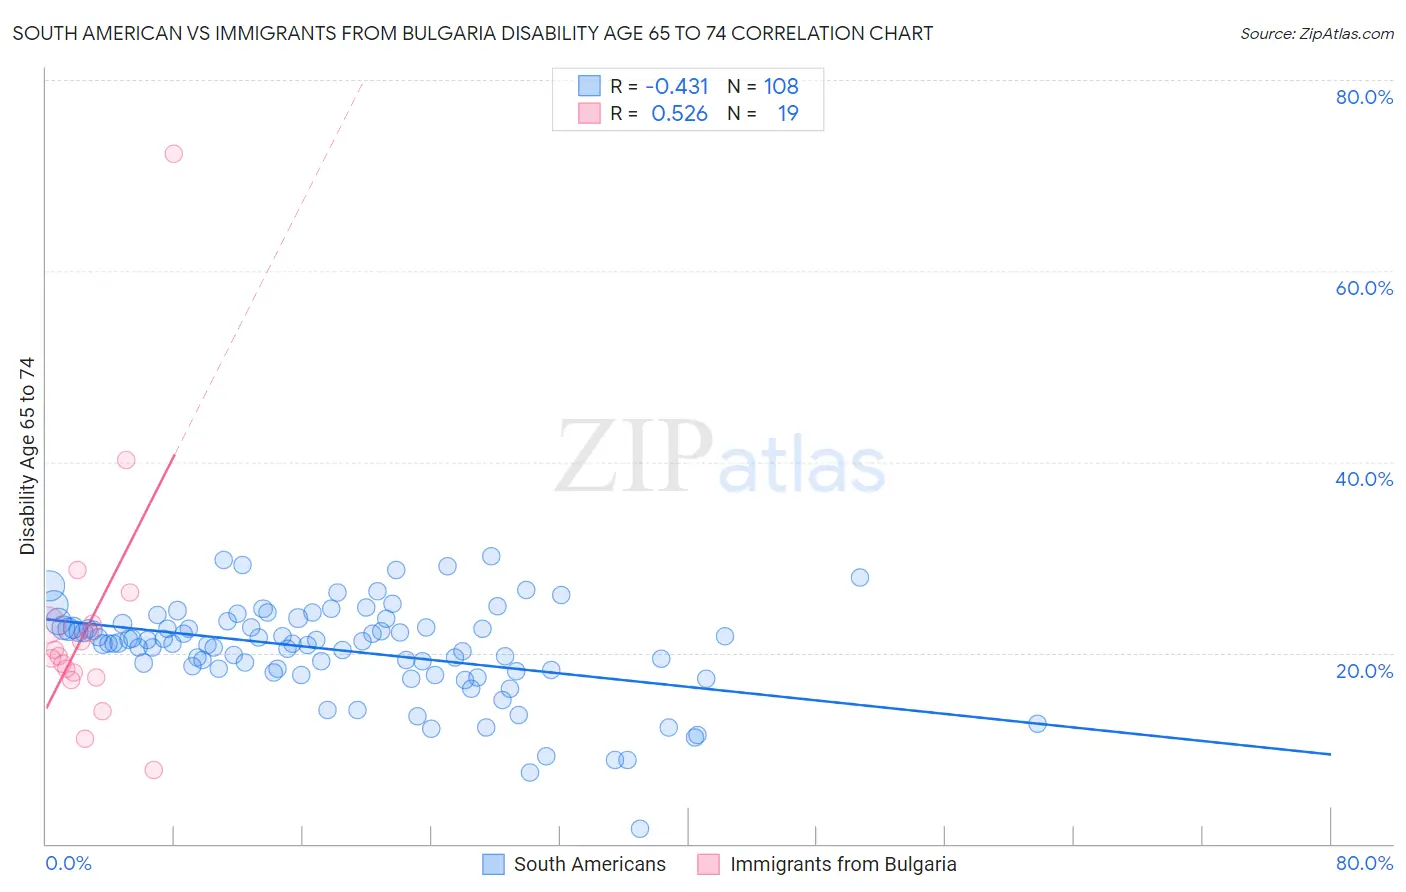 South American vs Immigrants from Bulgaria Disability Age 65 to 74